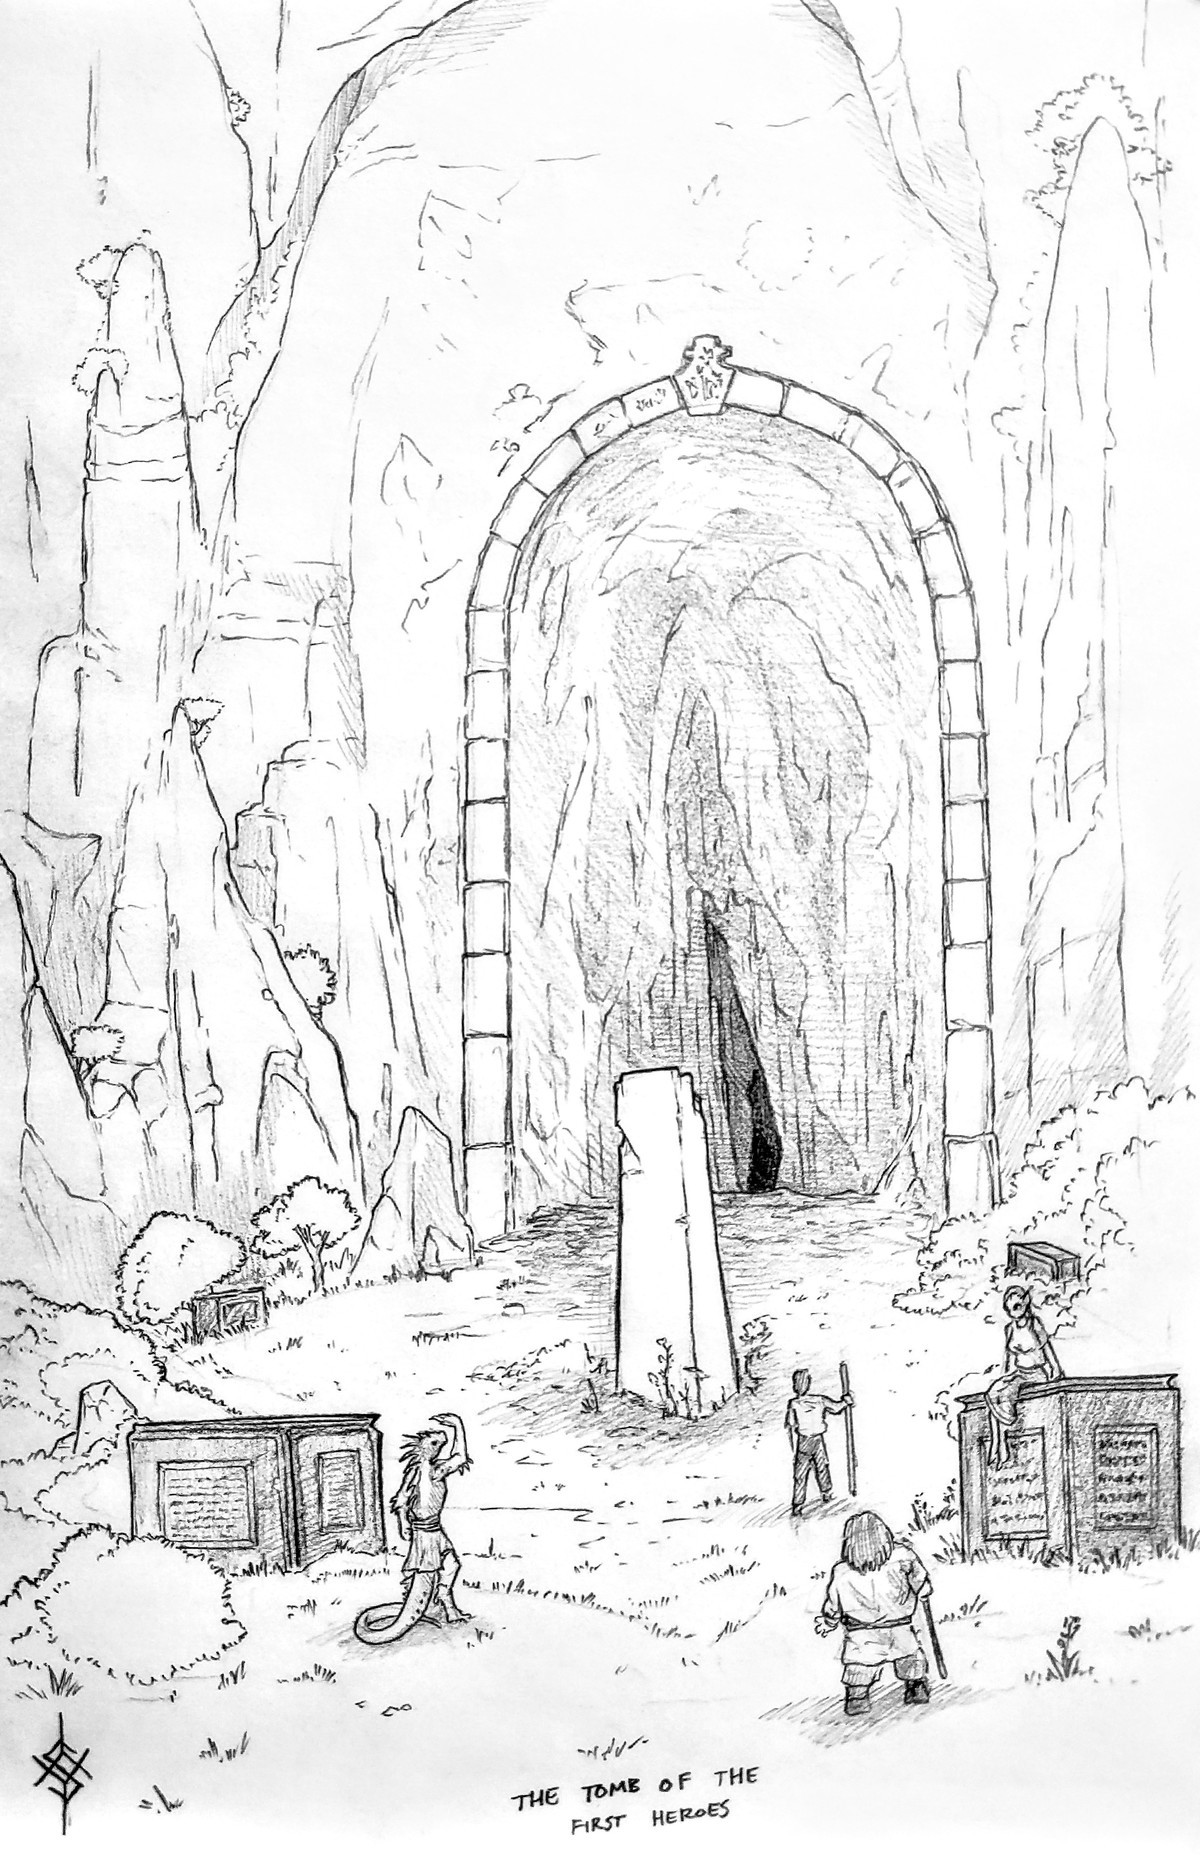 More of my rough drawings. .. Vagina dungeon.